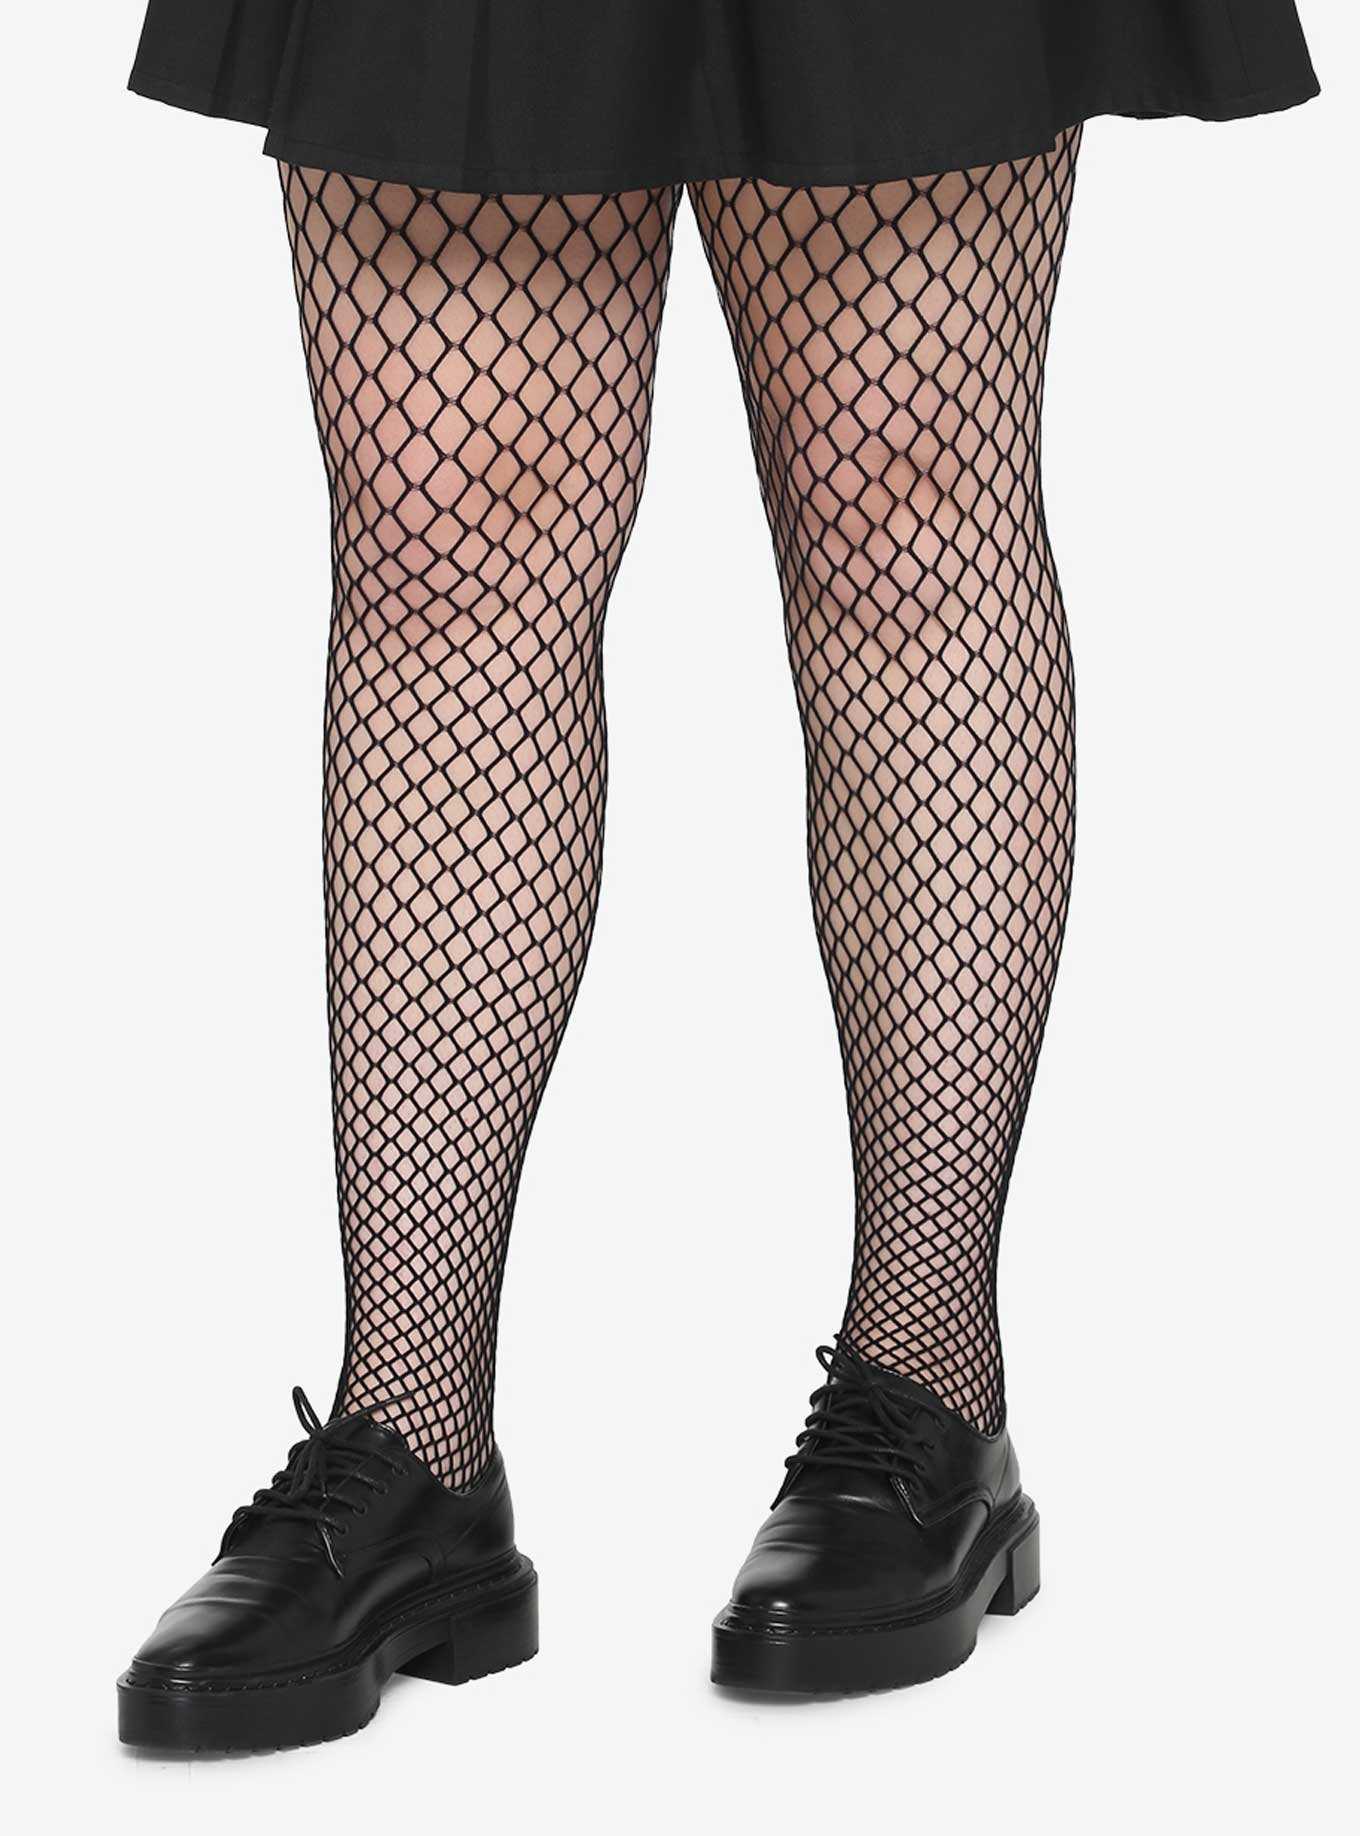 Plus Size Tights: Fishnet, Opaque & Lace Tights